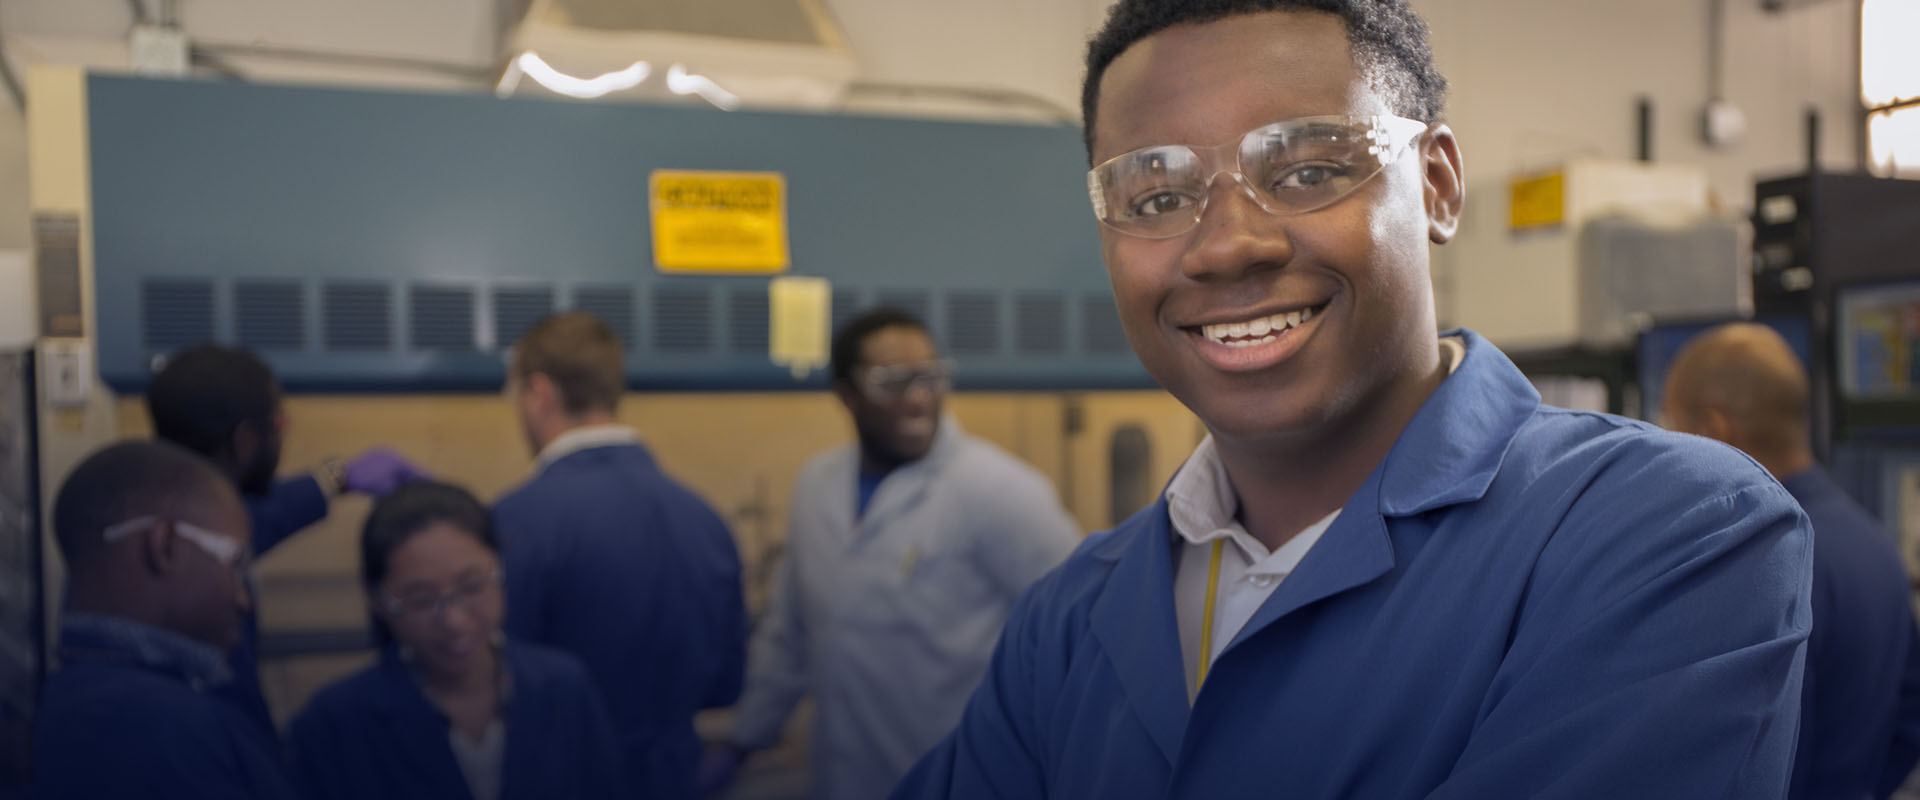 Smiling young student in protective glasses at LANL